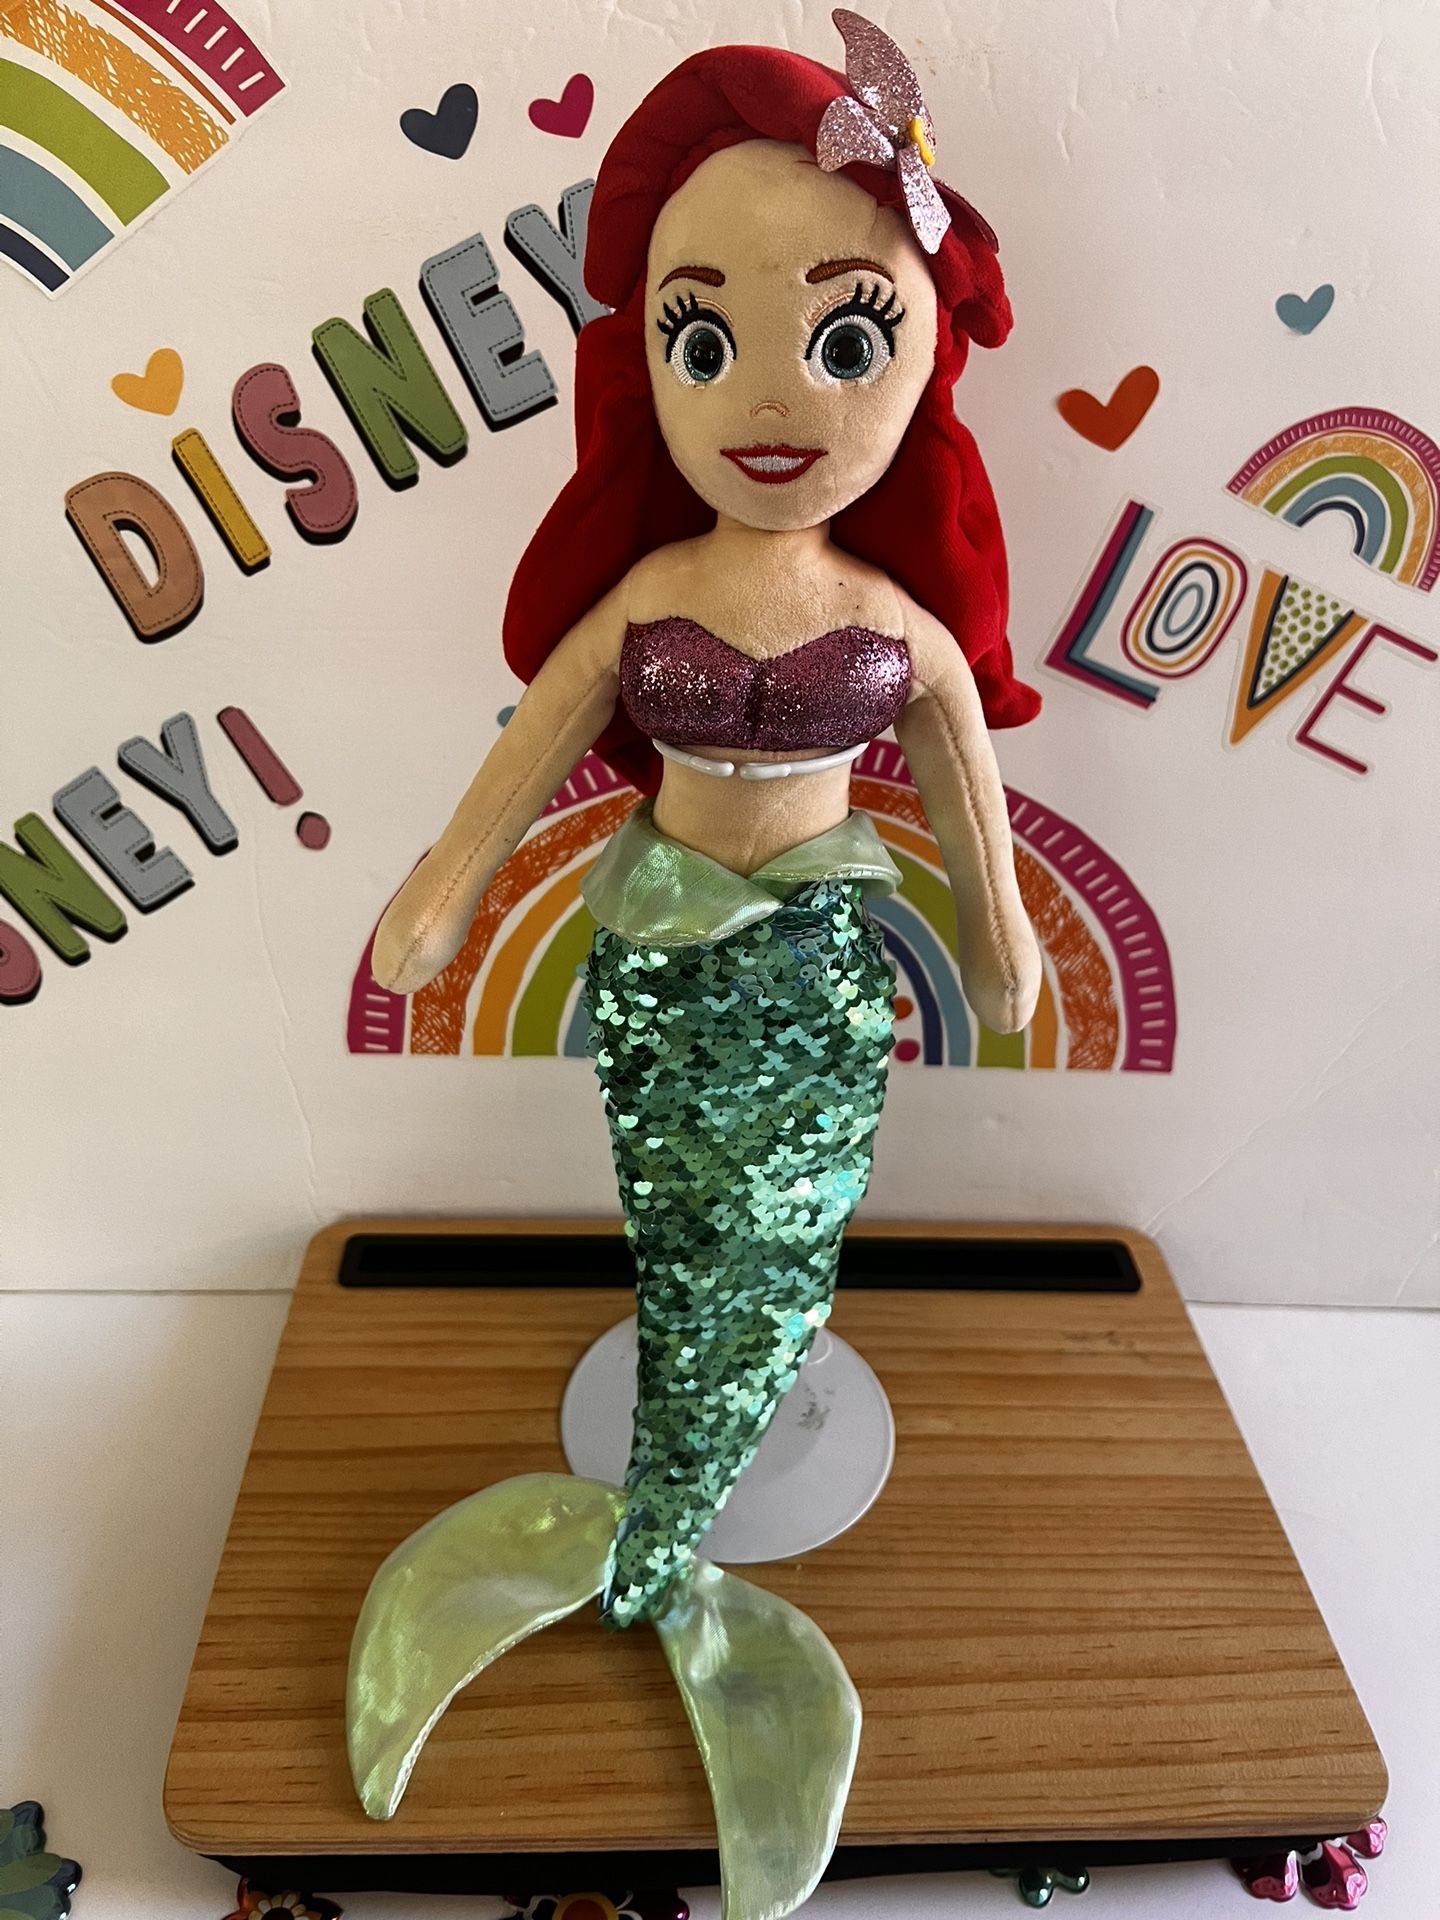 DISNEY 16 INCH LITTLE MERMAID PLUSH WITH SEQUENCE BODY! LIKE NEW 